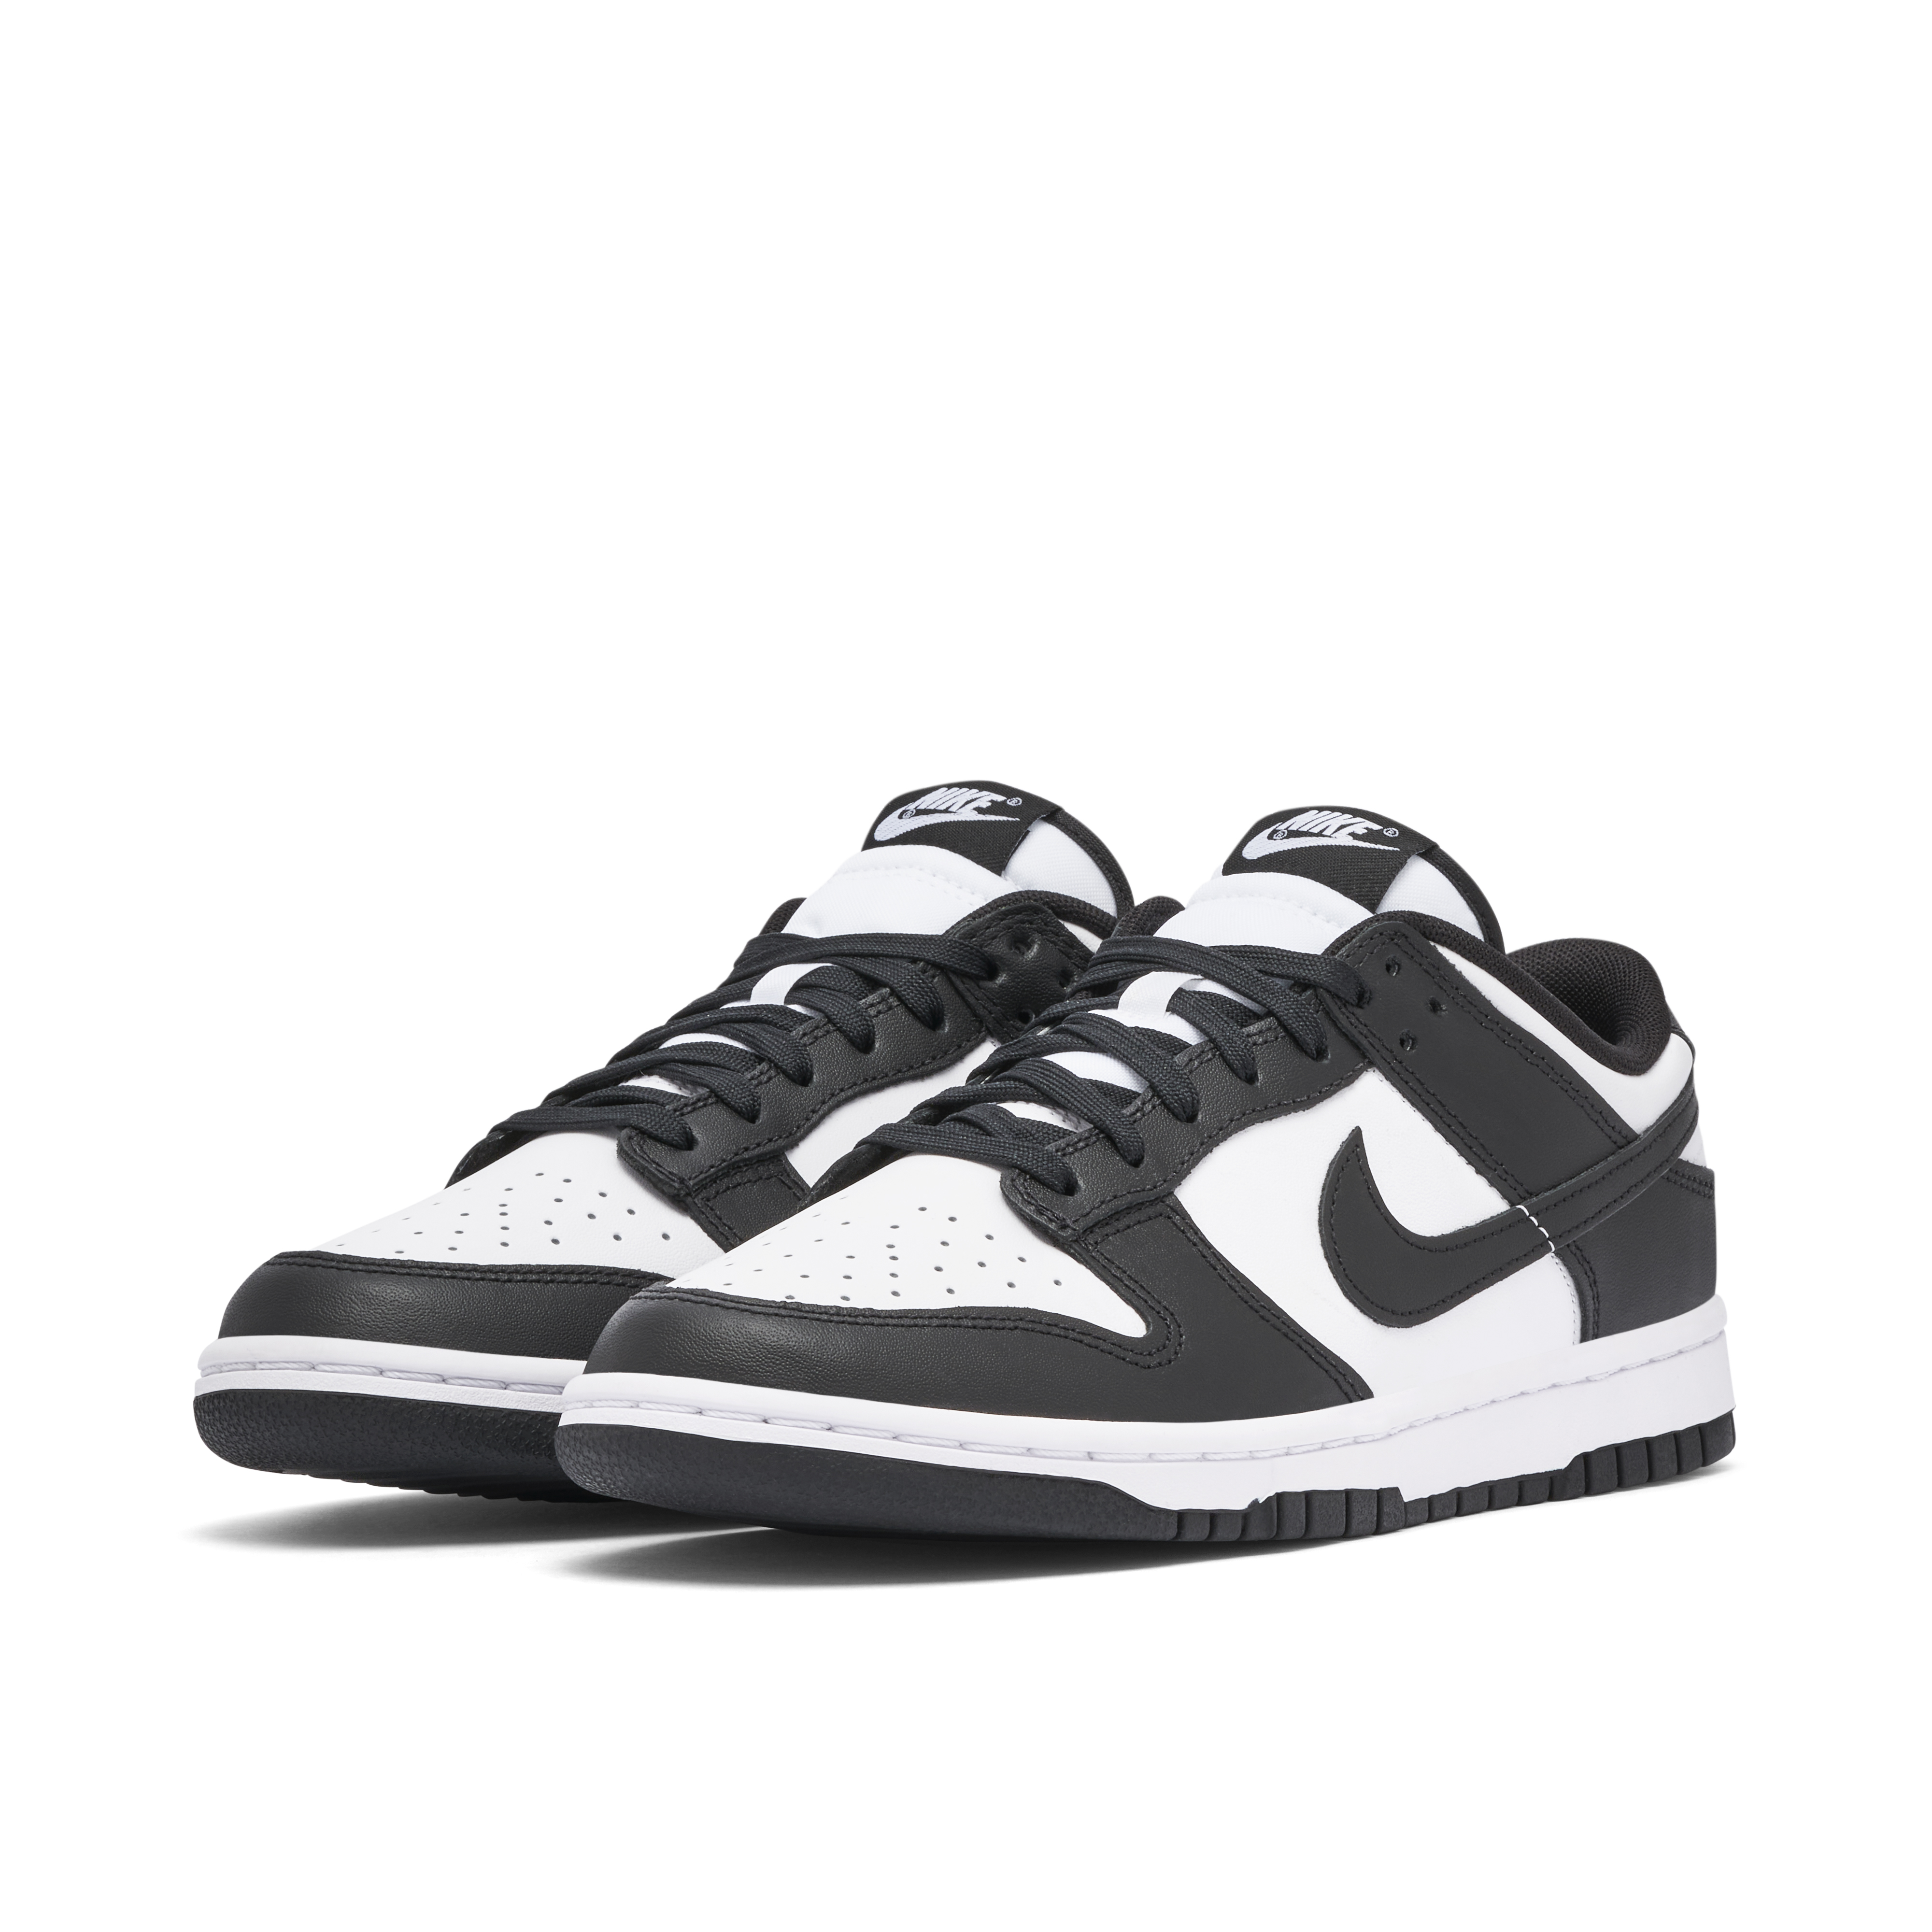 nike dunks black and white low